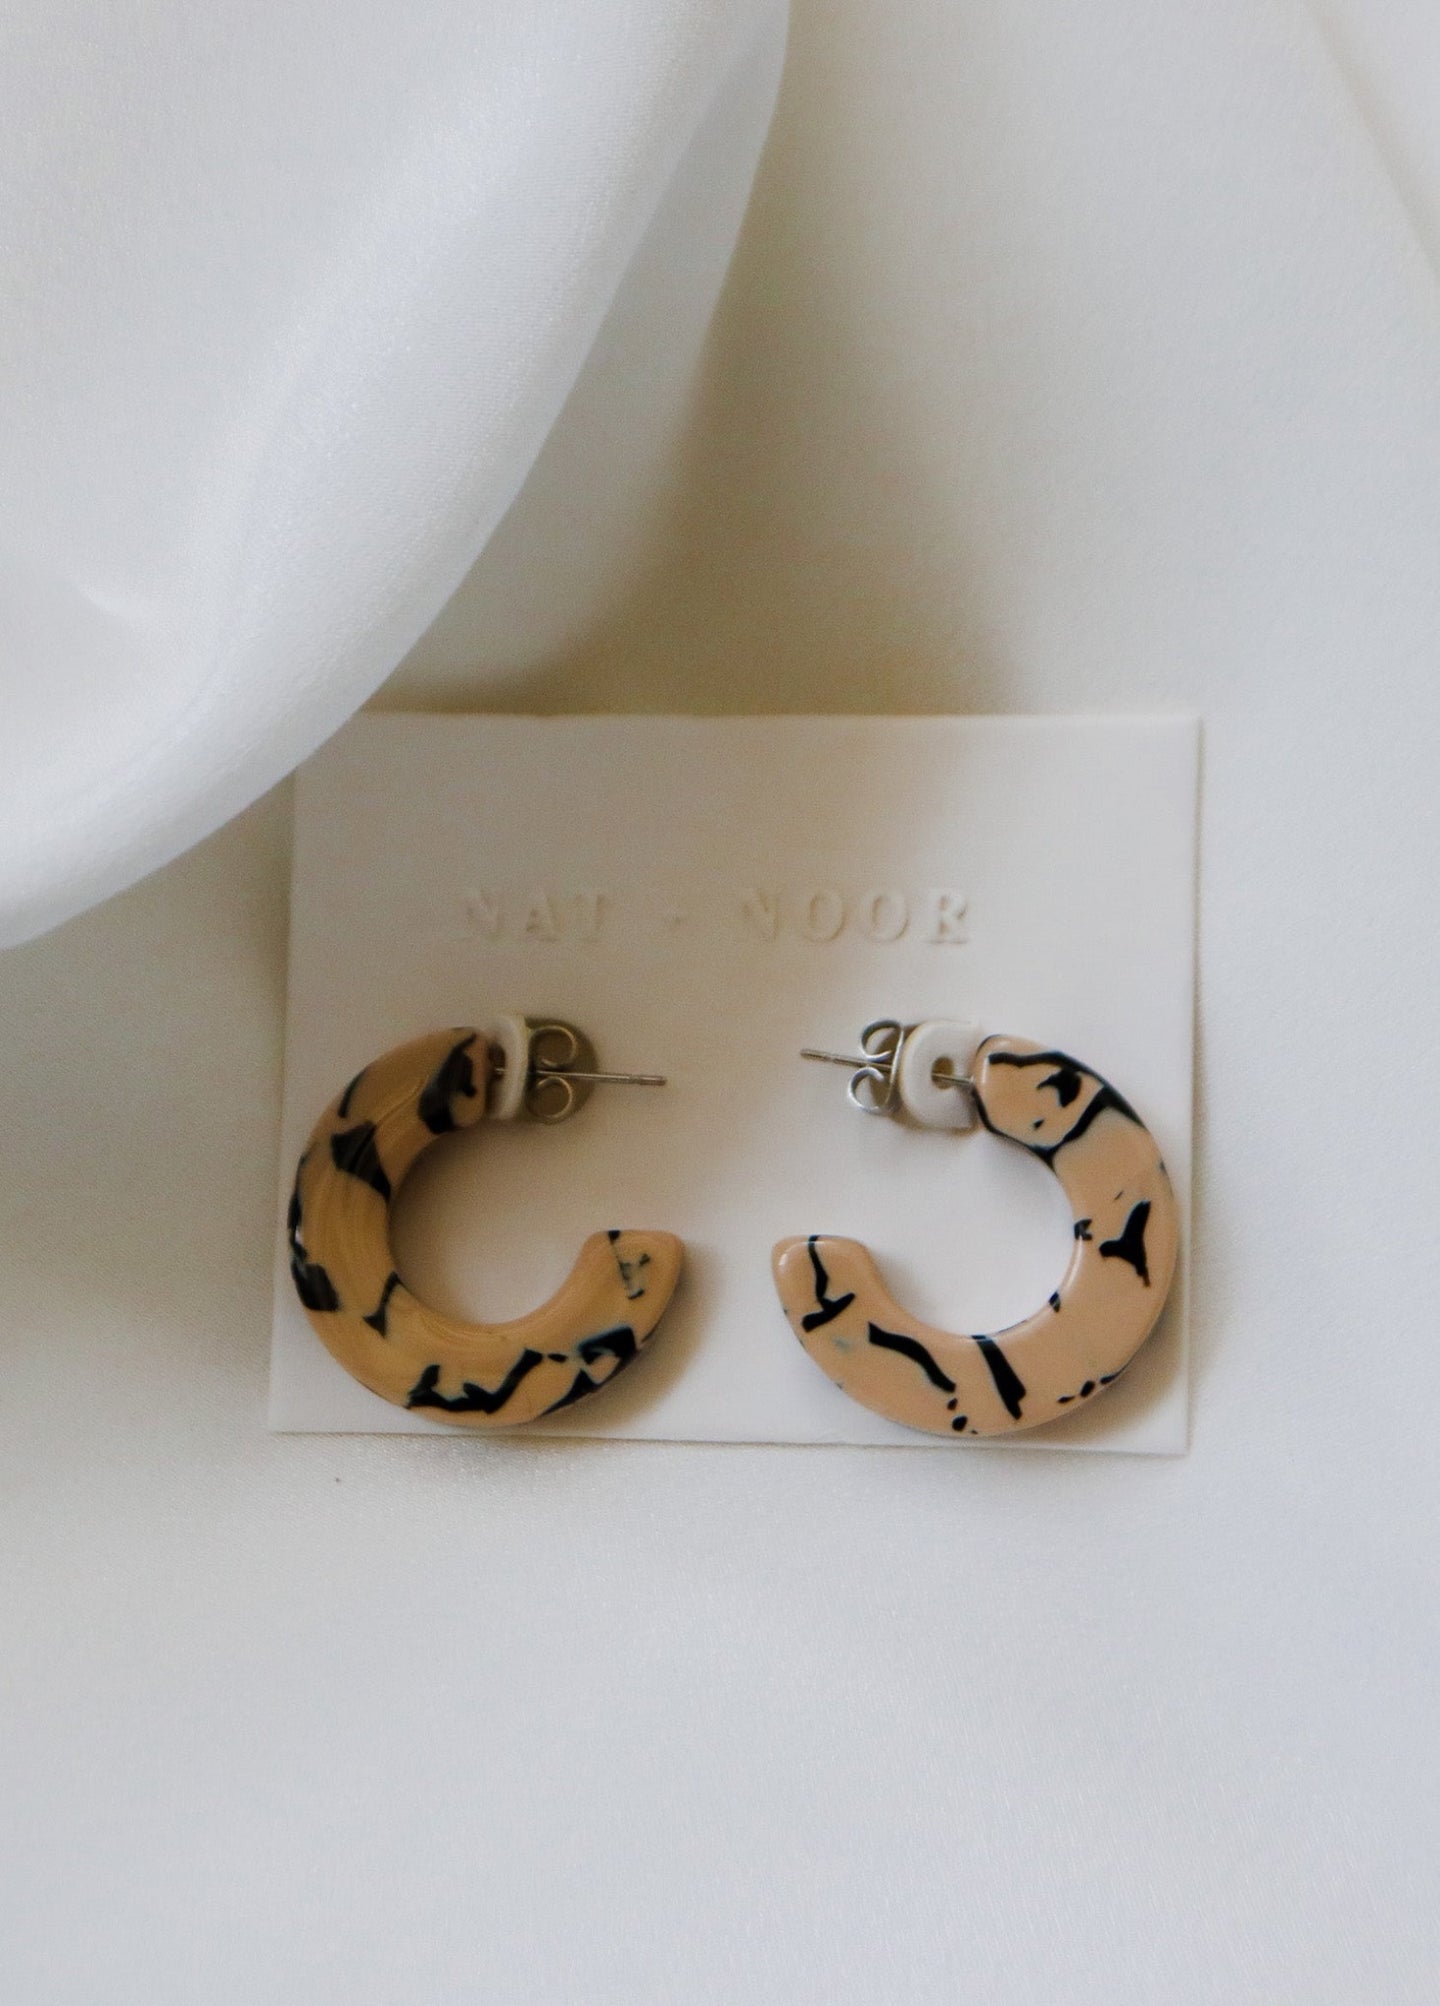 felicity hoop earrings in the color marble. earrings are shown on an earring card laid on top of a white sheet.